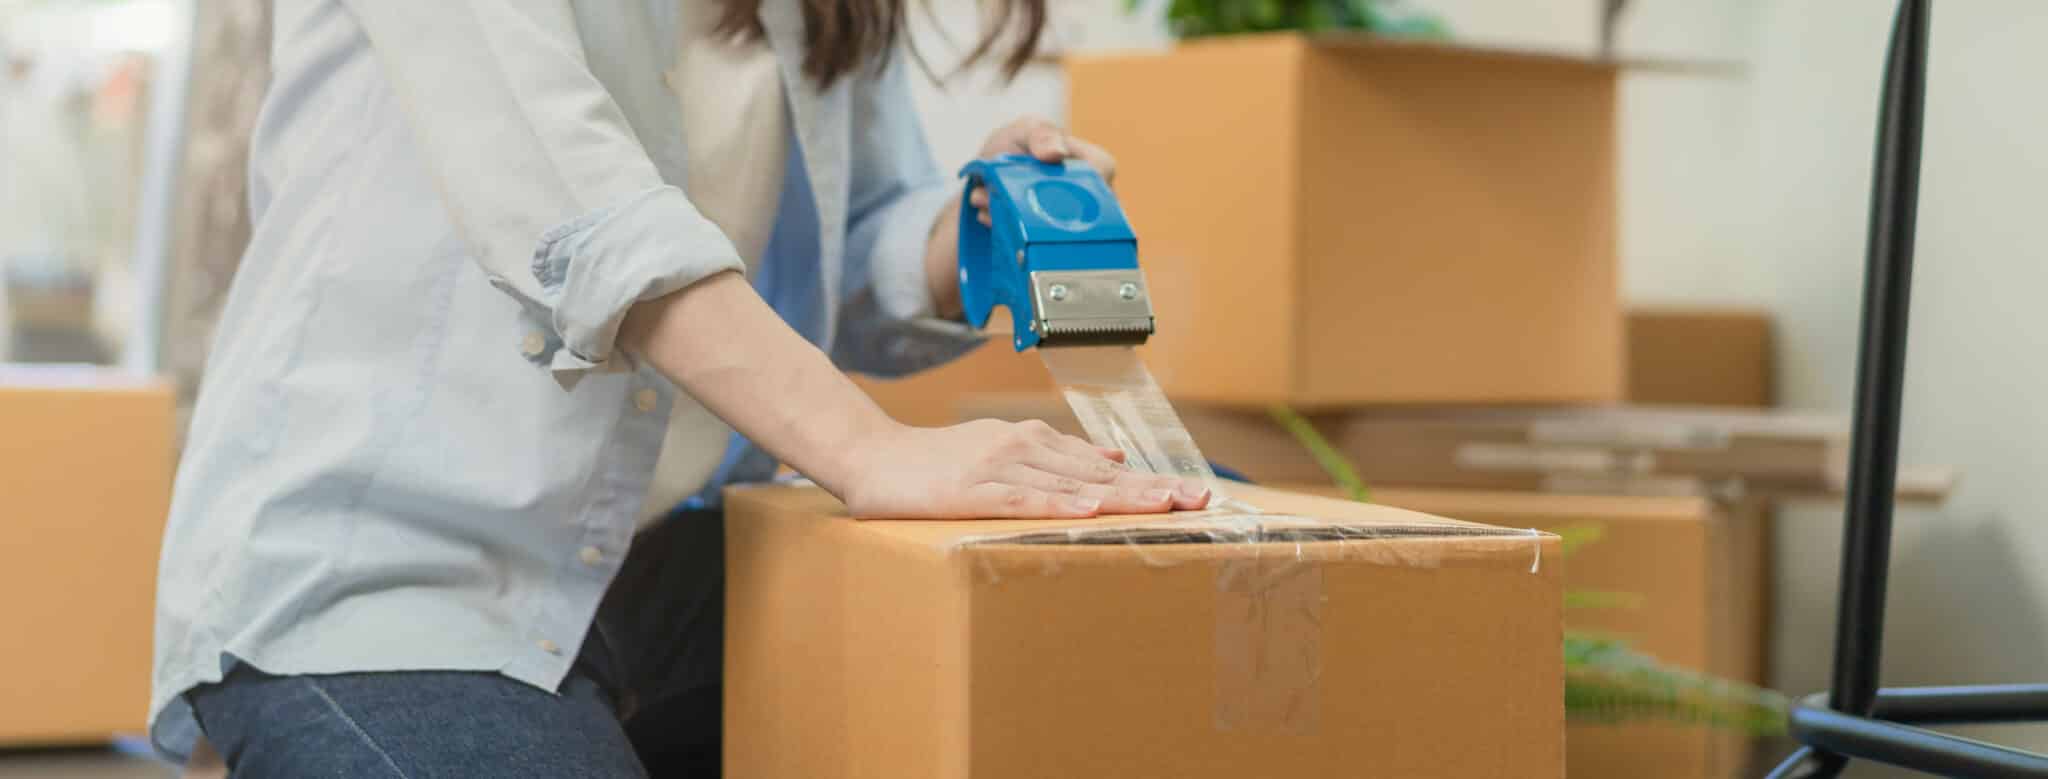 Woman packing a box with other boxes behind her.